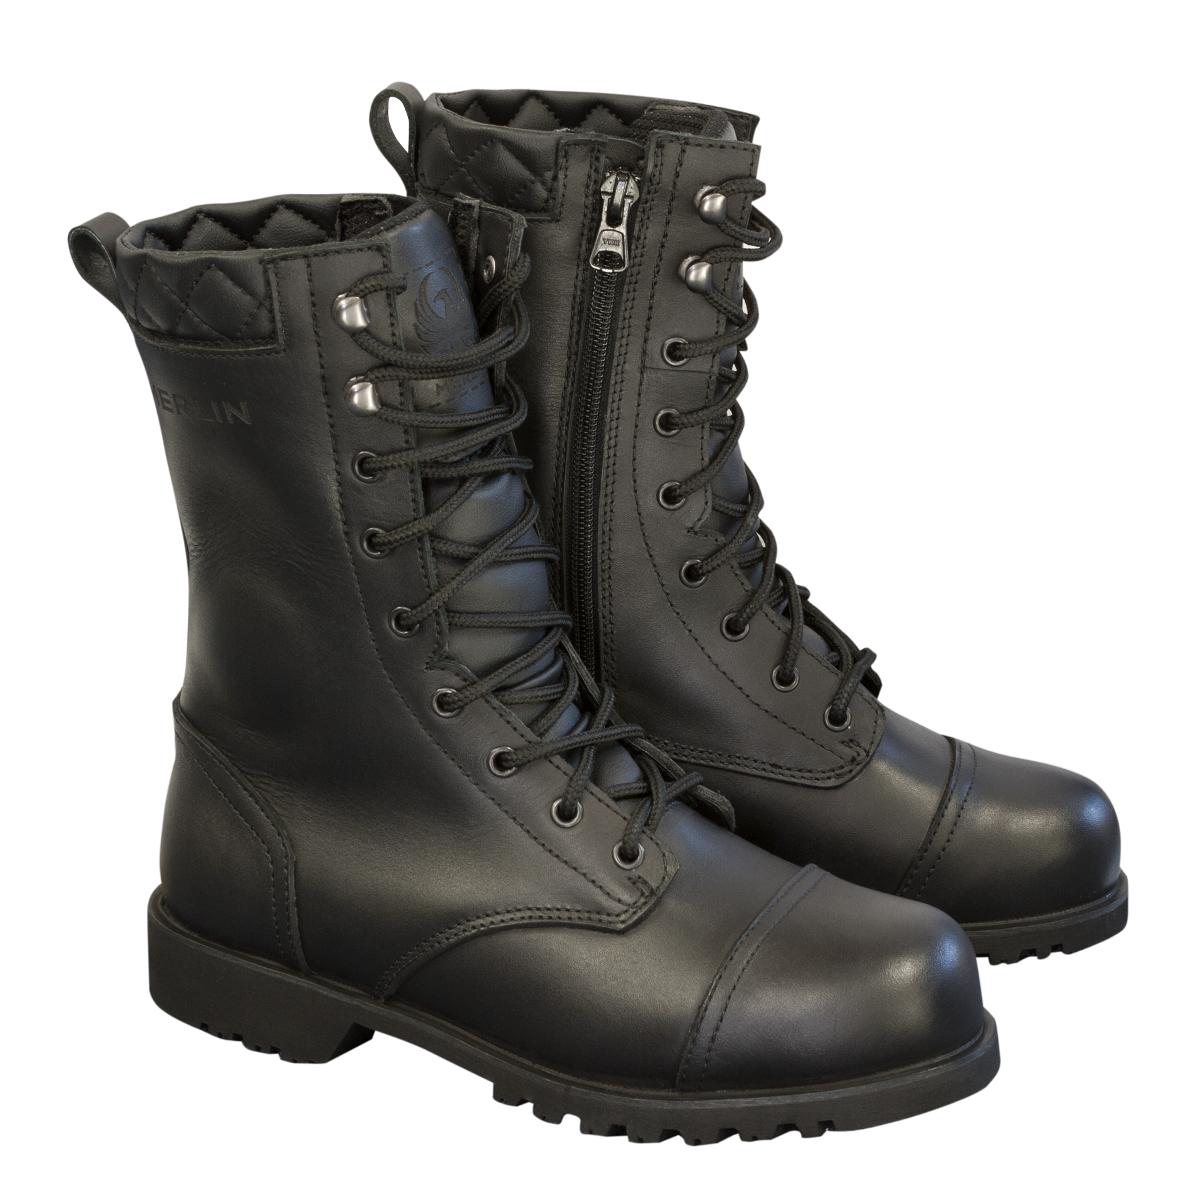 Black Boot PNG Background Image